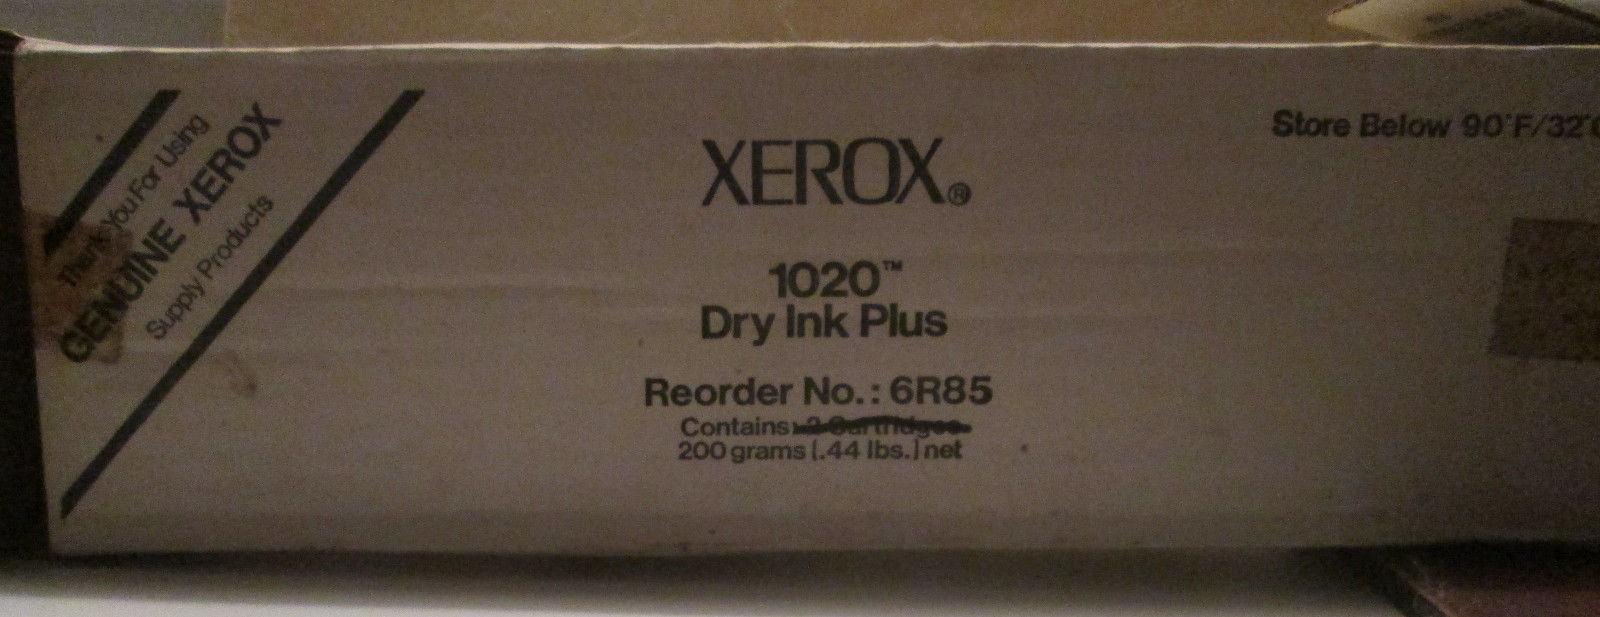 3 Genuine Xerox DRY INK PLUS 6R85  for Xerox 1020 printers  new/old facto sealed